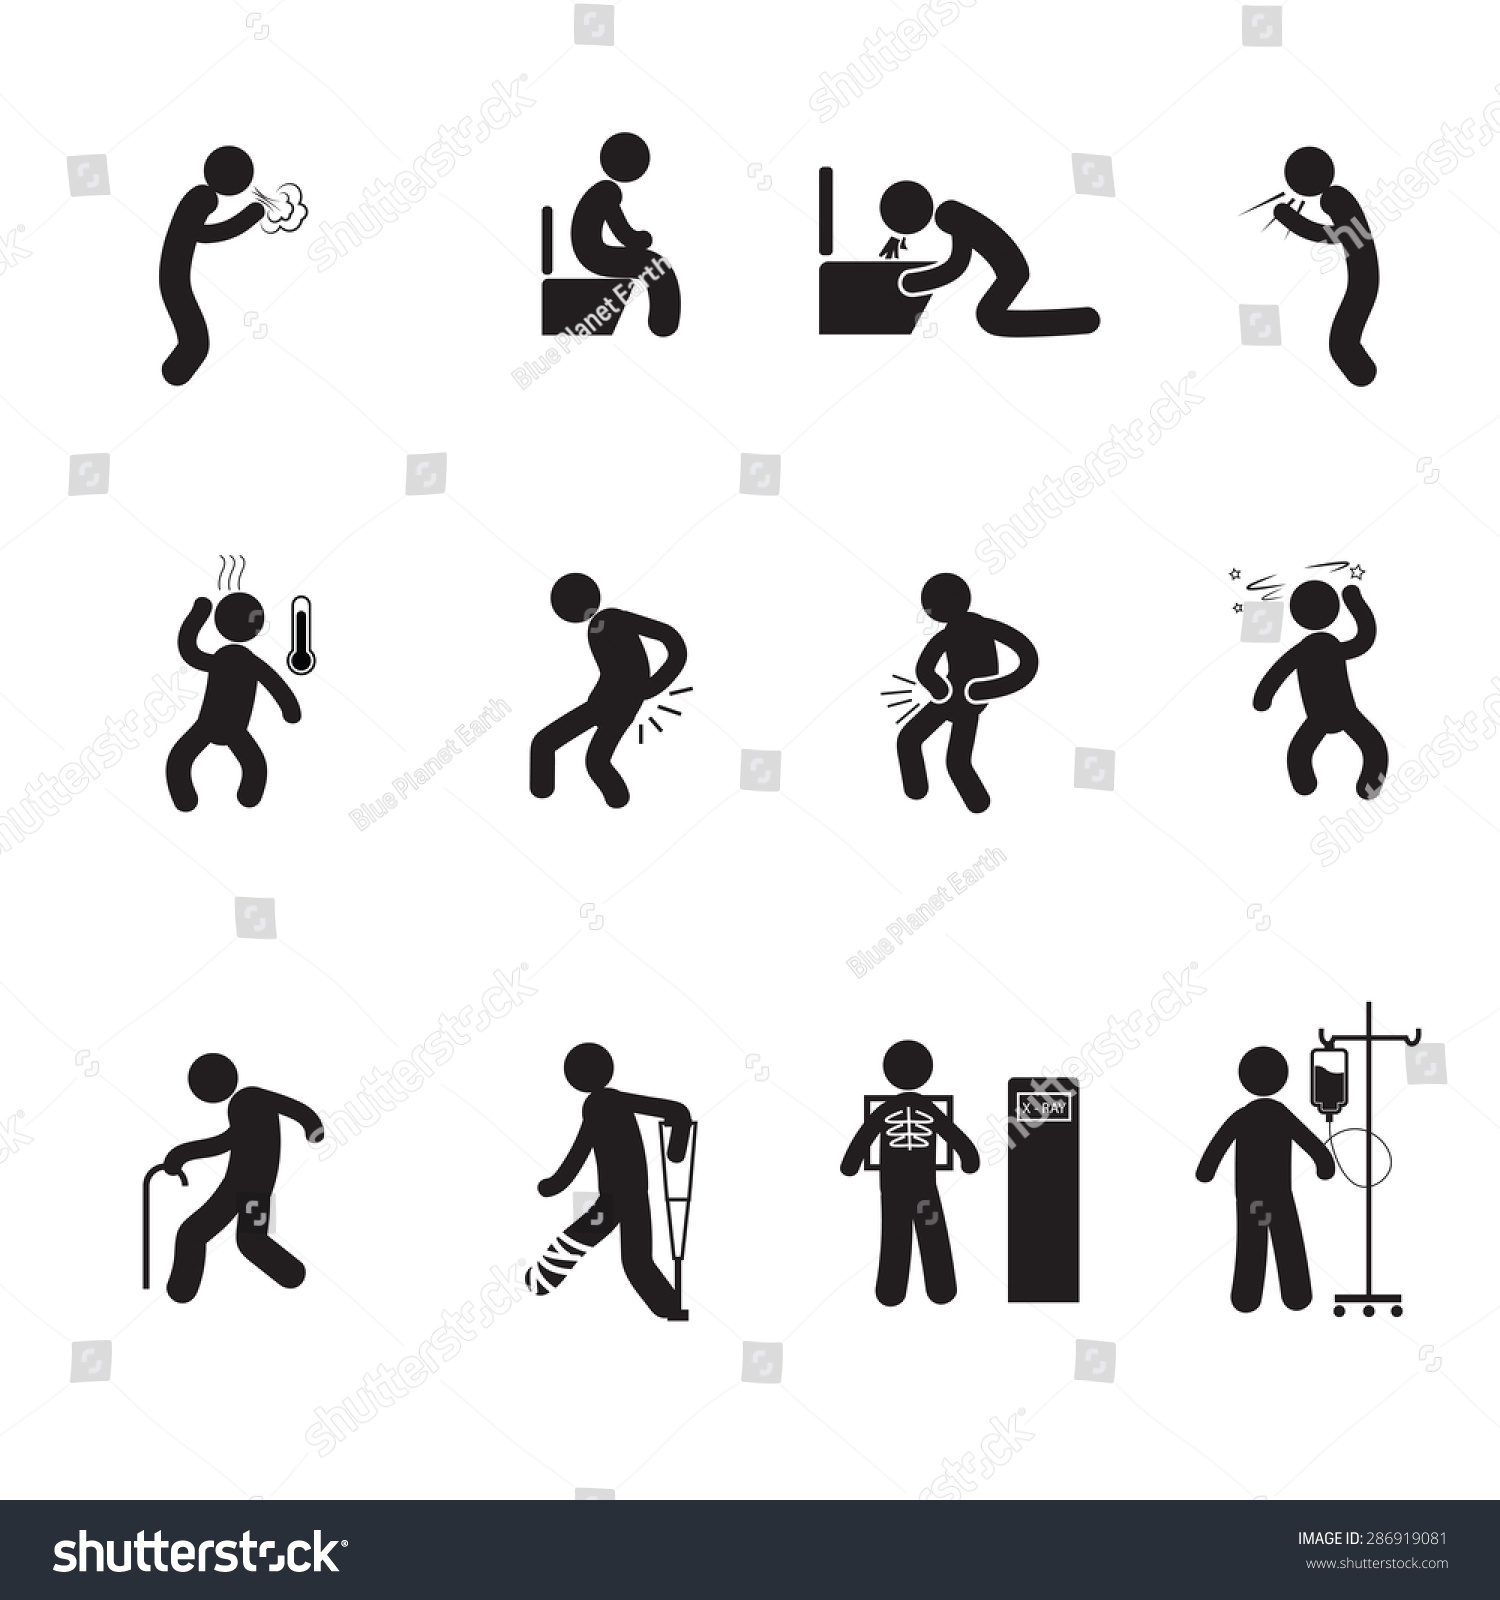 People Sick Icons Set Vector Silhouette - 286919081 : Shutterstock